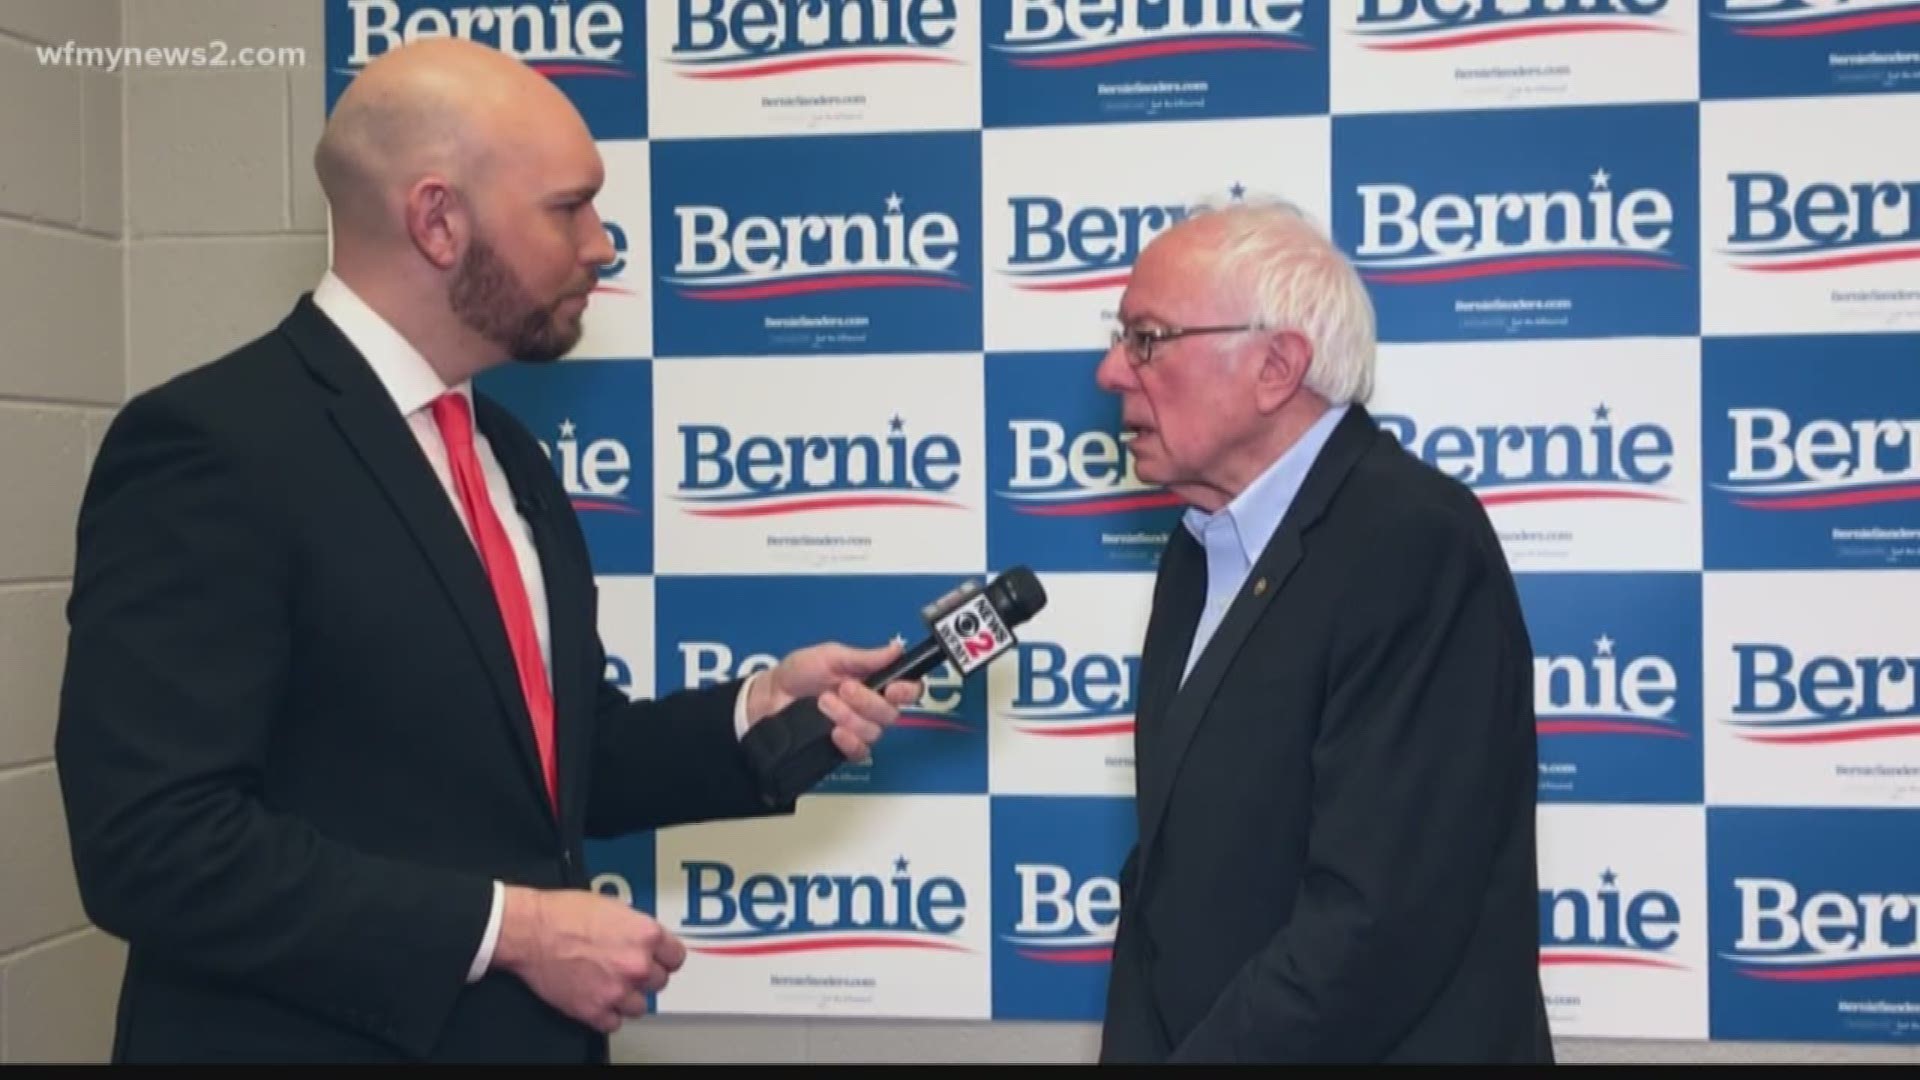 Bernie Sanders brought his campaign to Winston-Salem. After the event, he spoke to WFMY News 2's Ben Briscoe.